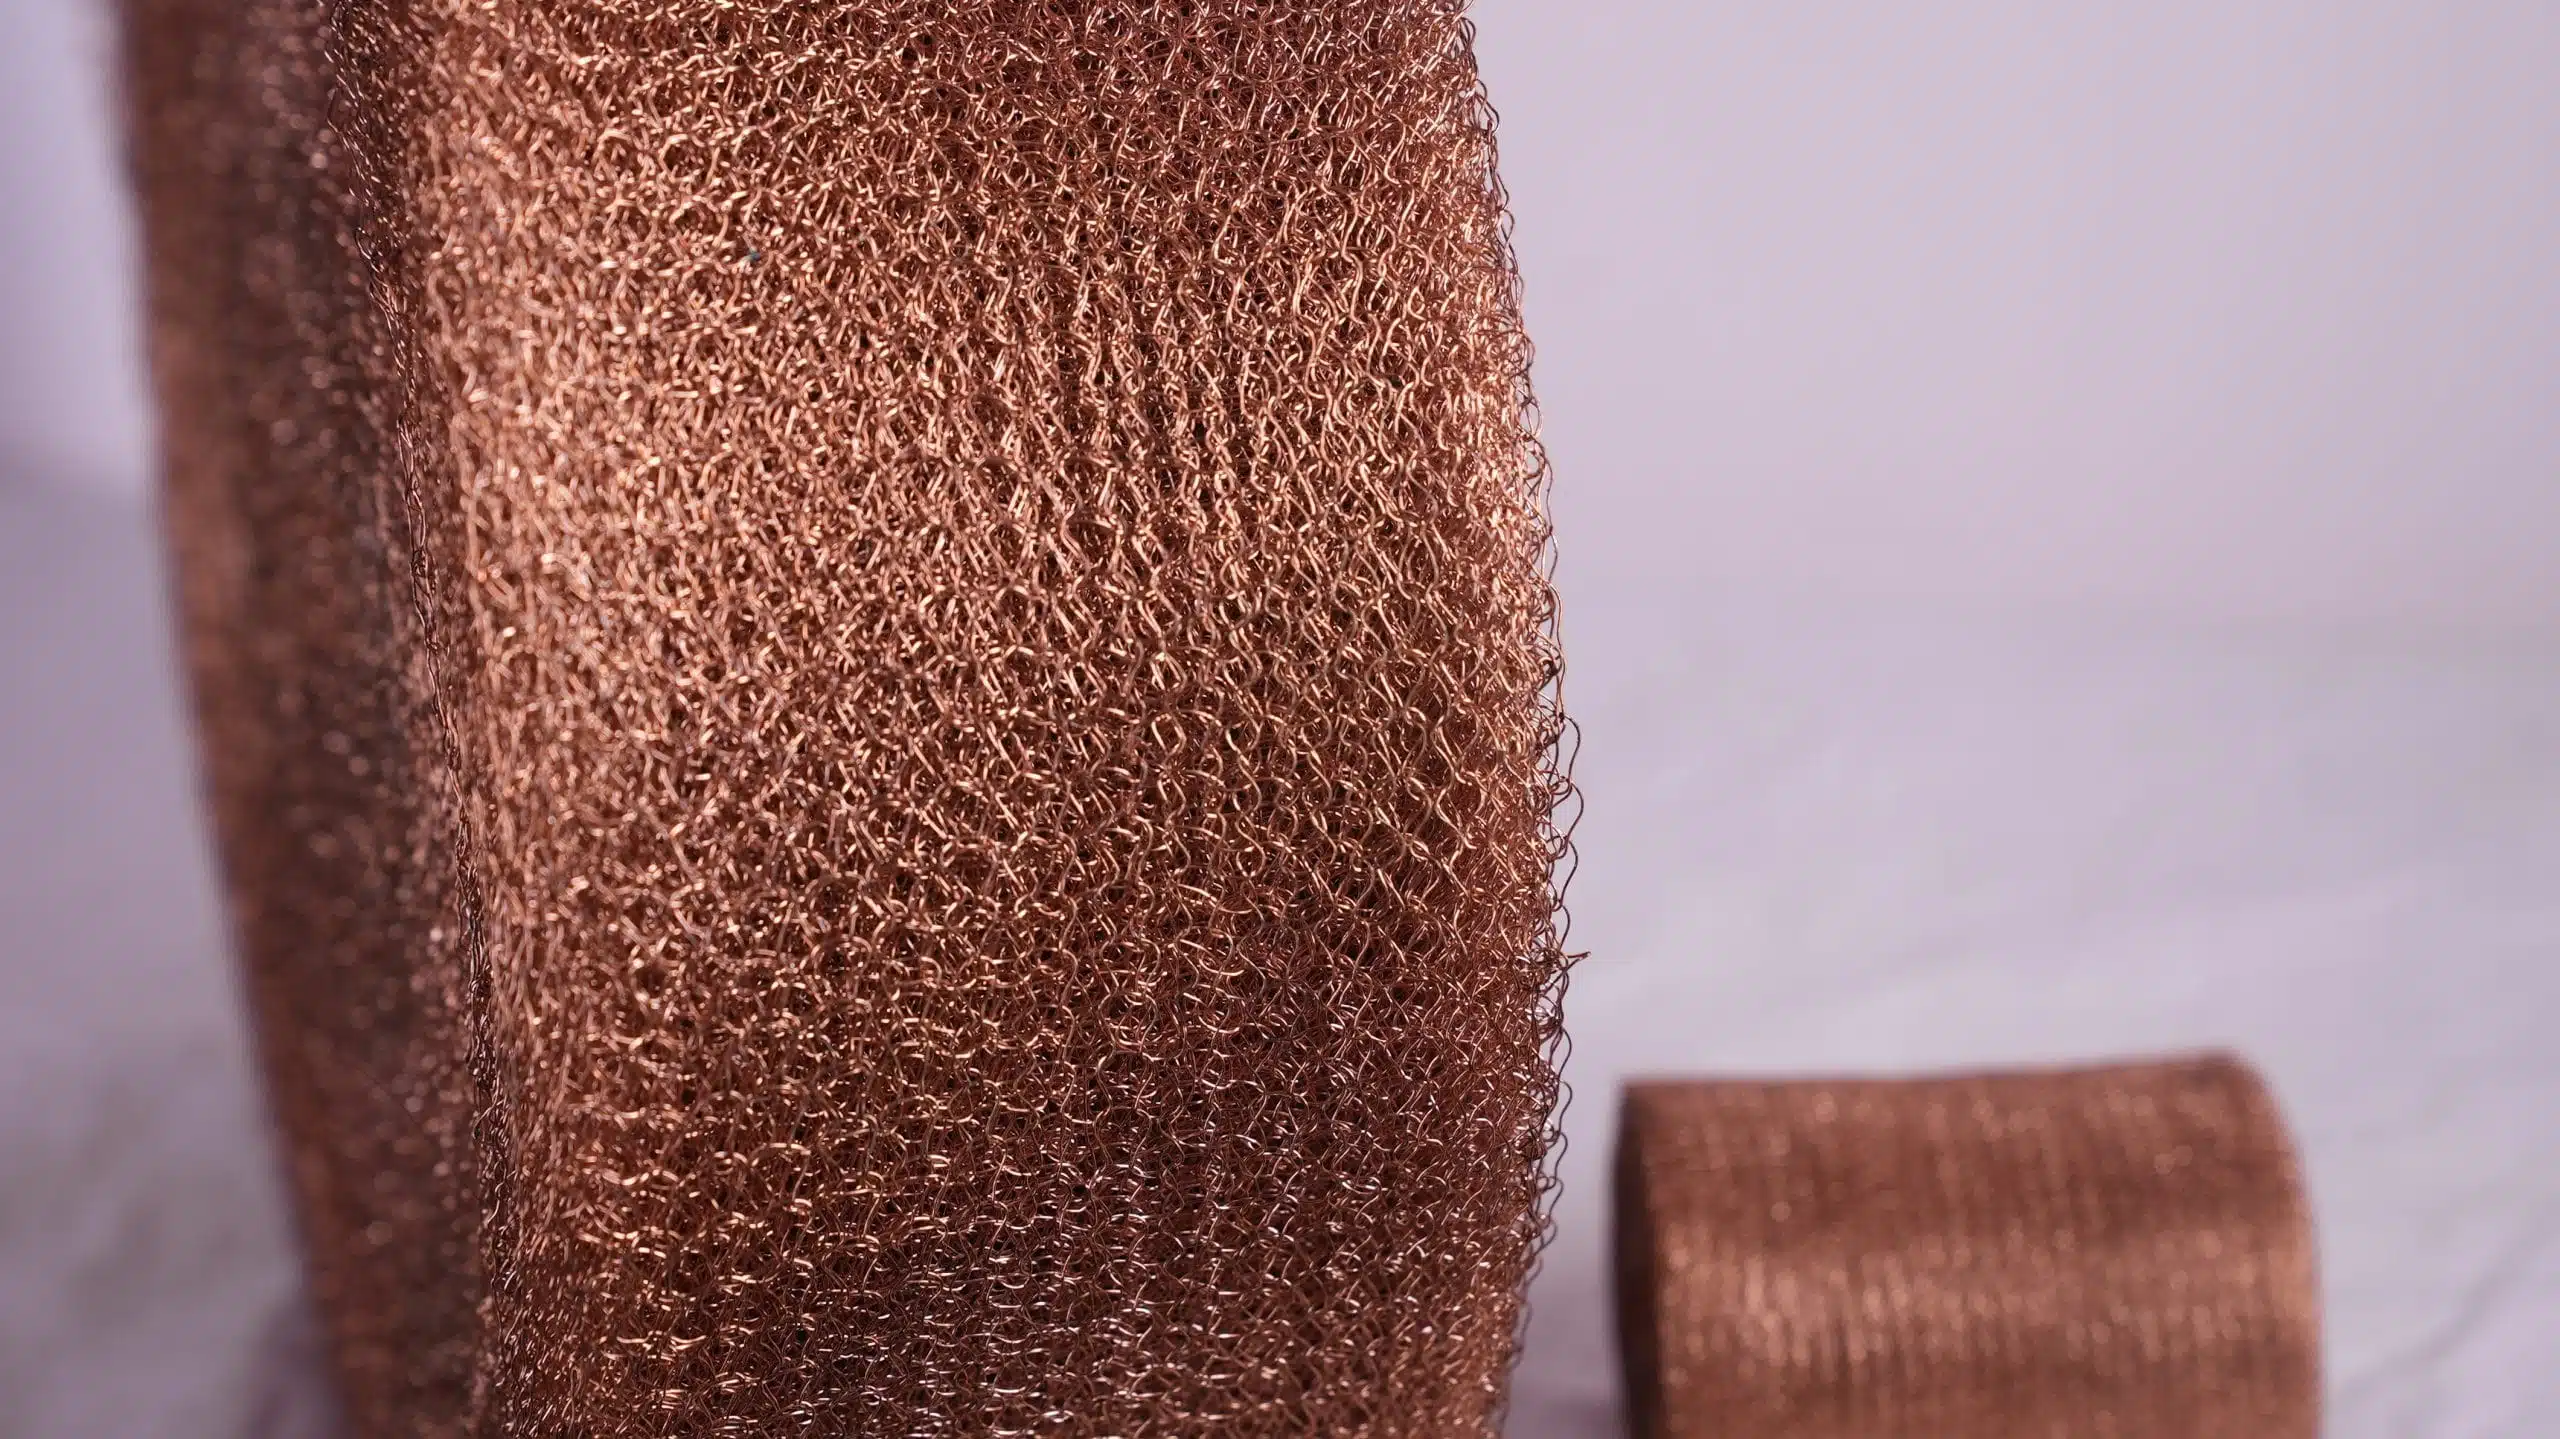 The Many Uses for Copper Wire Mesh